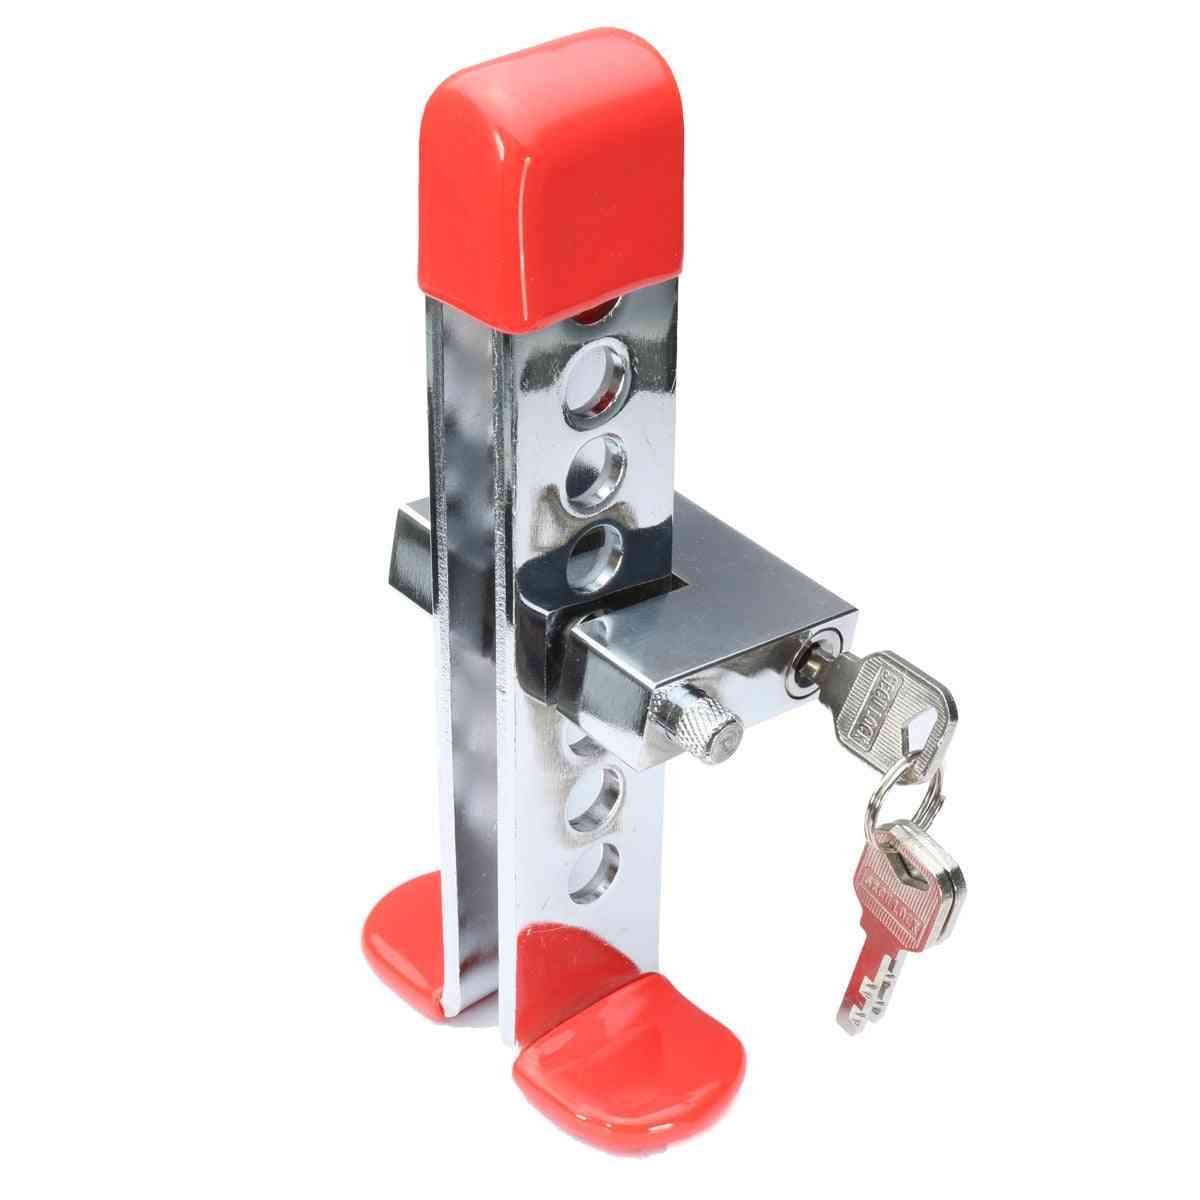 Steel Anti-theft Brake & Clutch Throttle Lever, Security Lock For Car